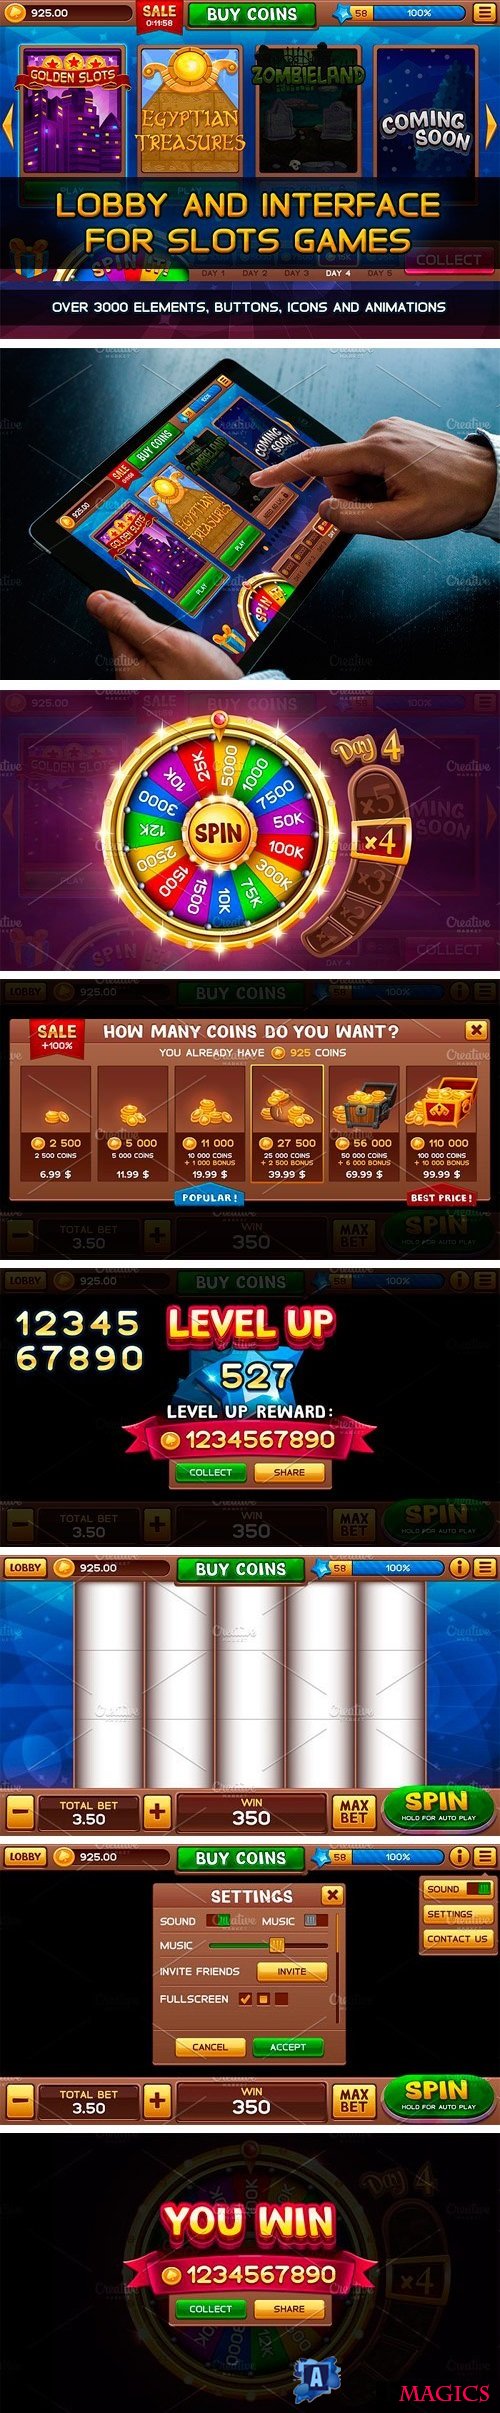 Lobby and GUI for Slots Games 1883670